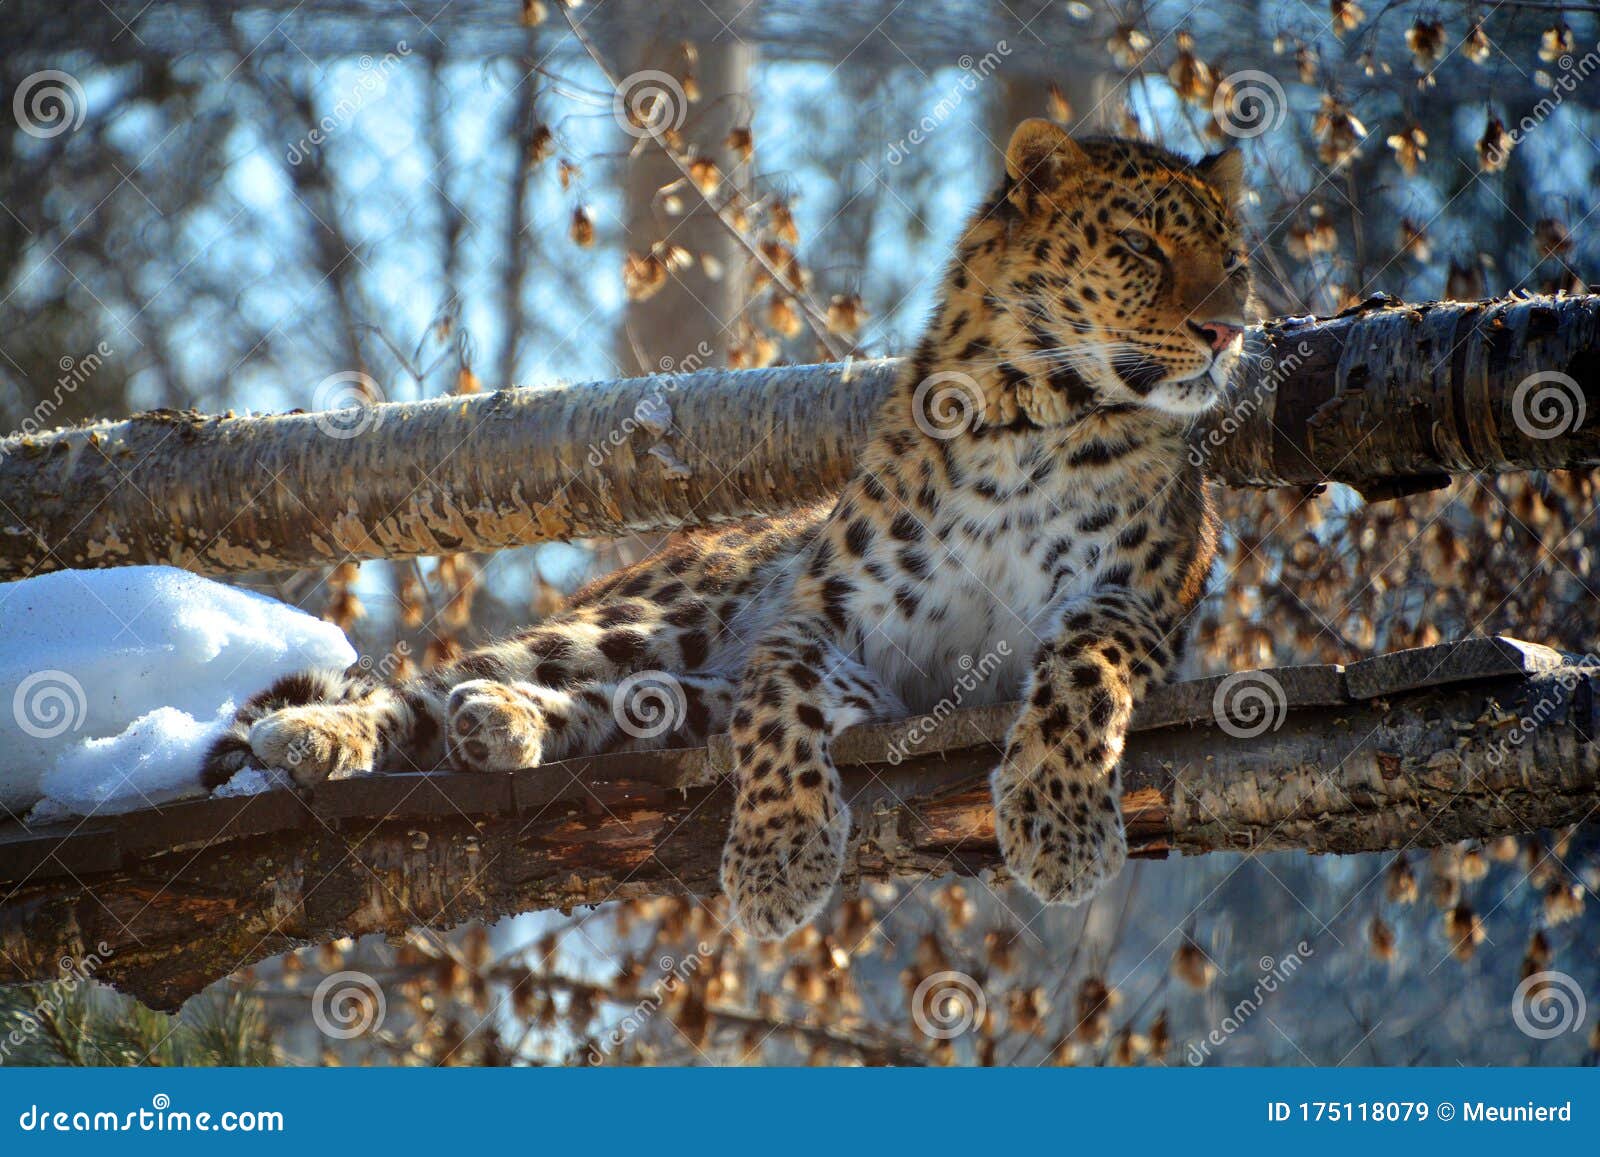 amur leopard is a leopard subspecies native to the primorye region